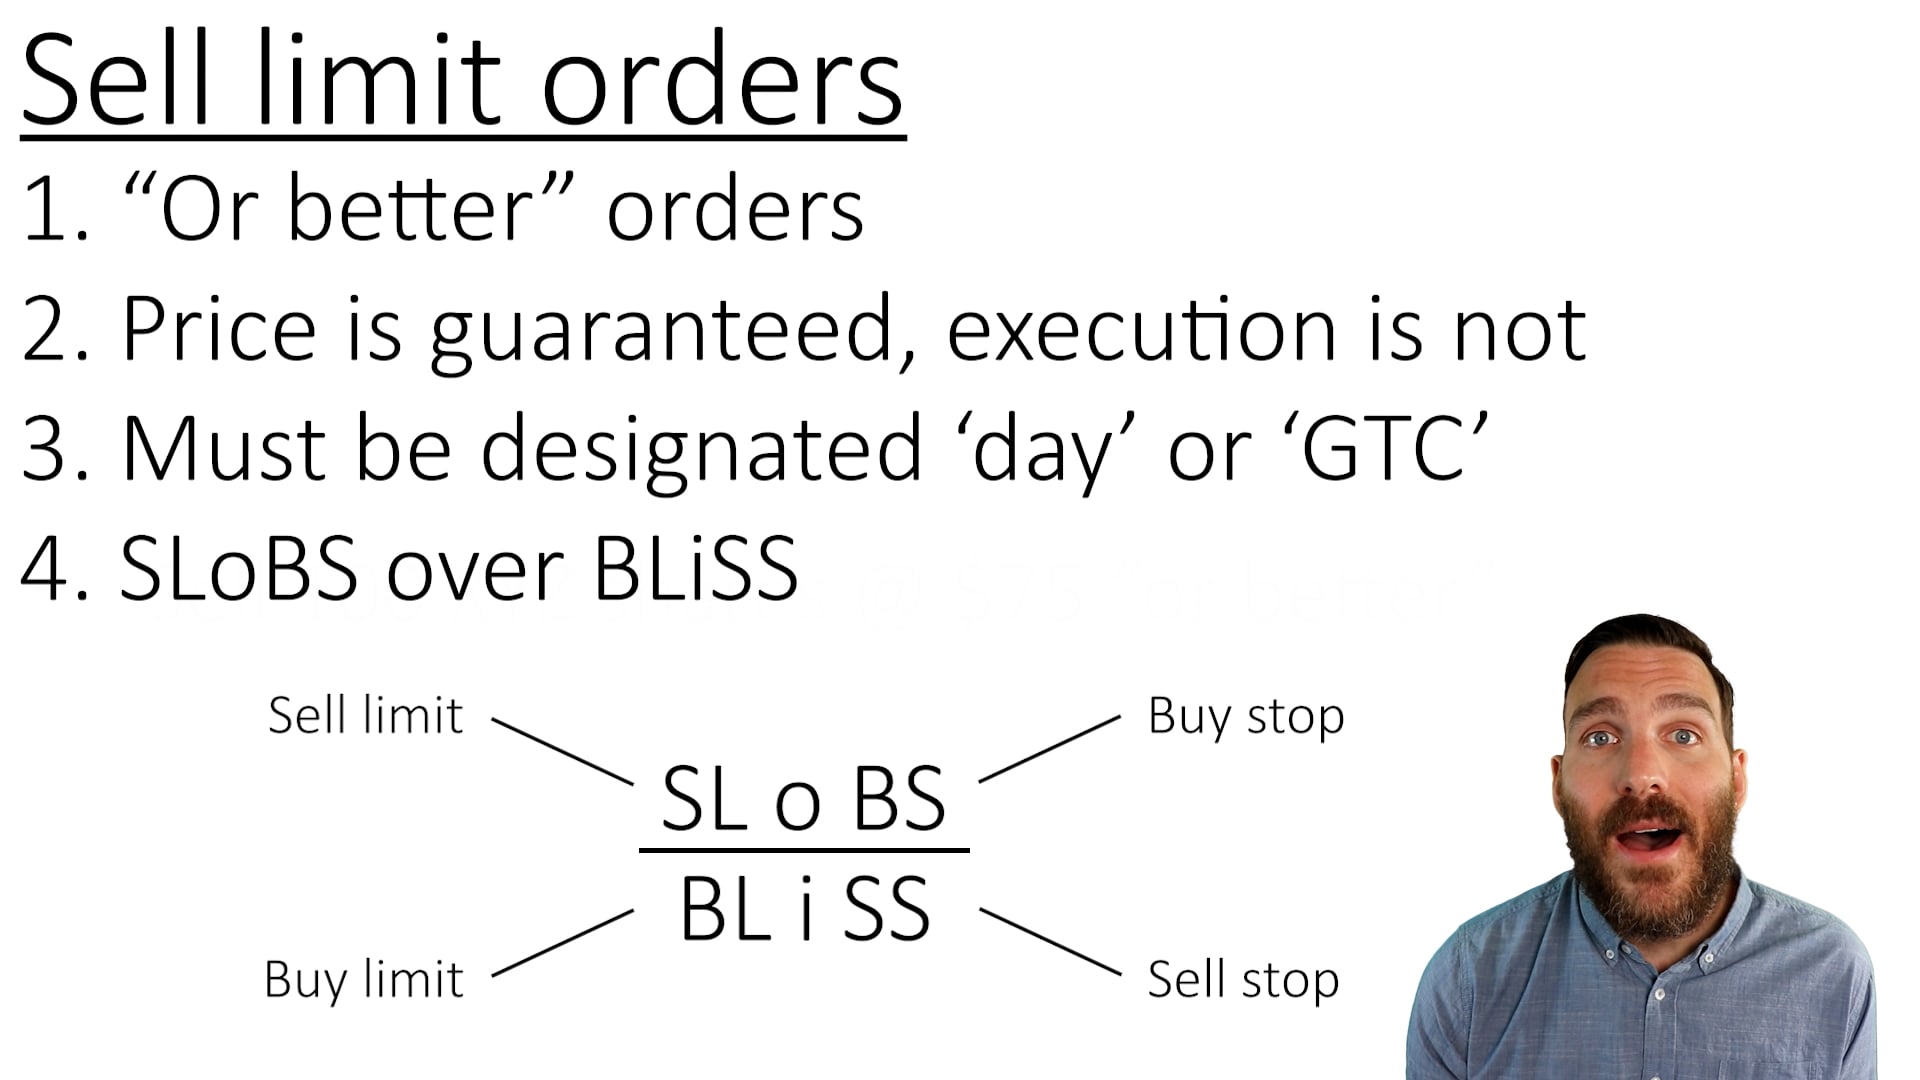 Sell limit orders